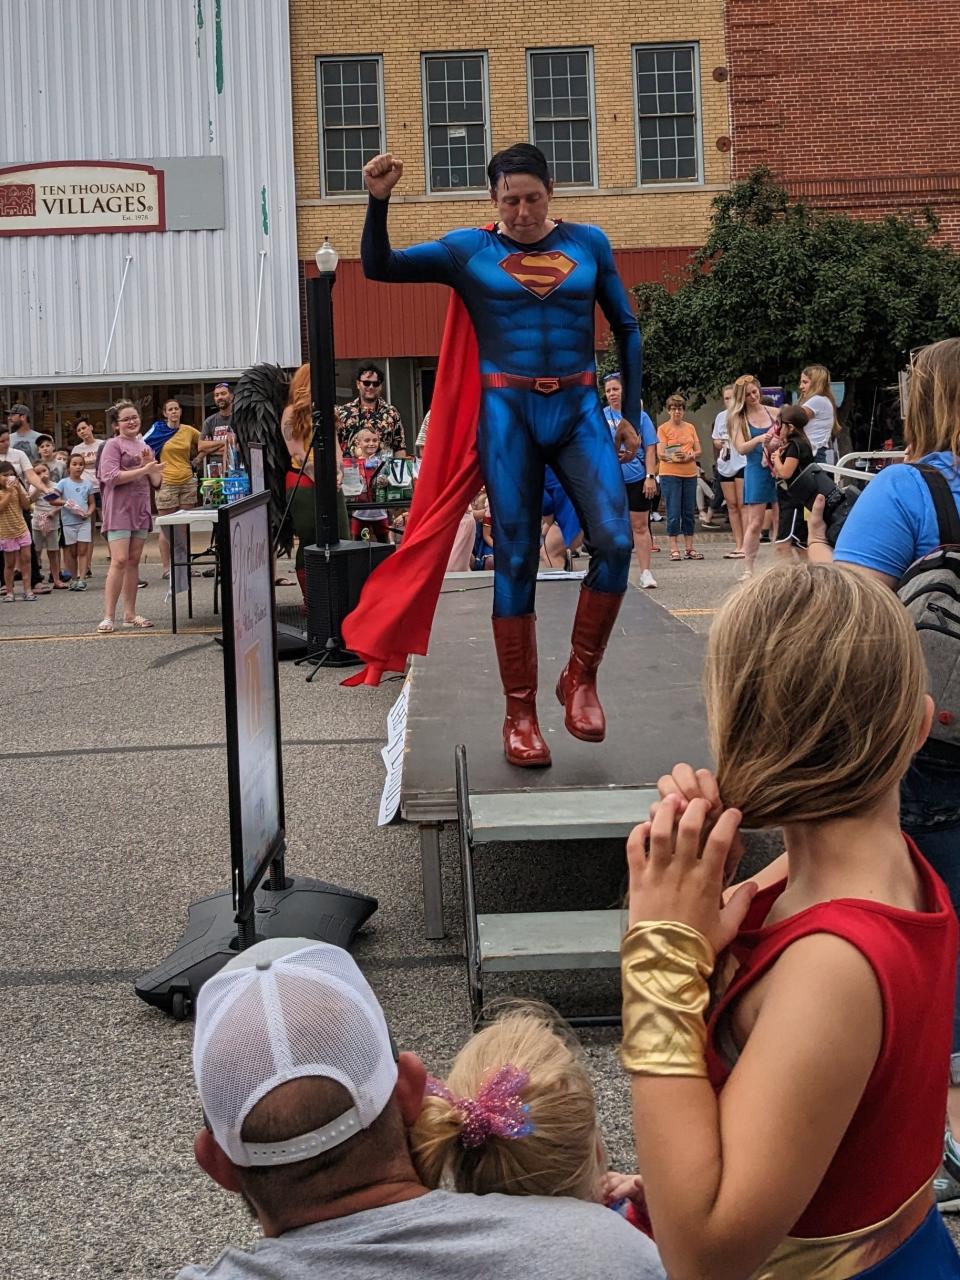 Each year, Hutchinson transitions into "Smallville" for a day to honor Superman's fictional Kansas hometown. It hosts Smallville Con, a comic book convention, for two days each June.